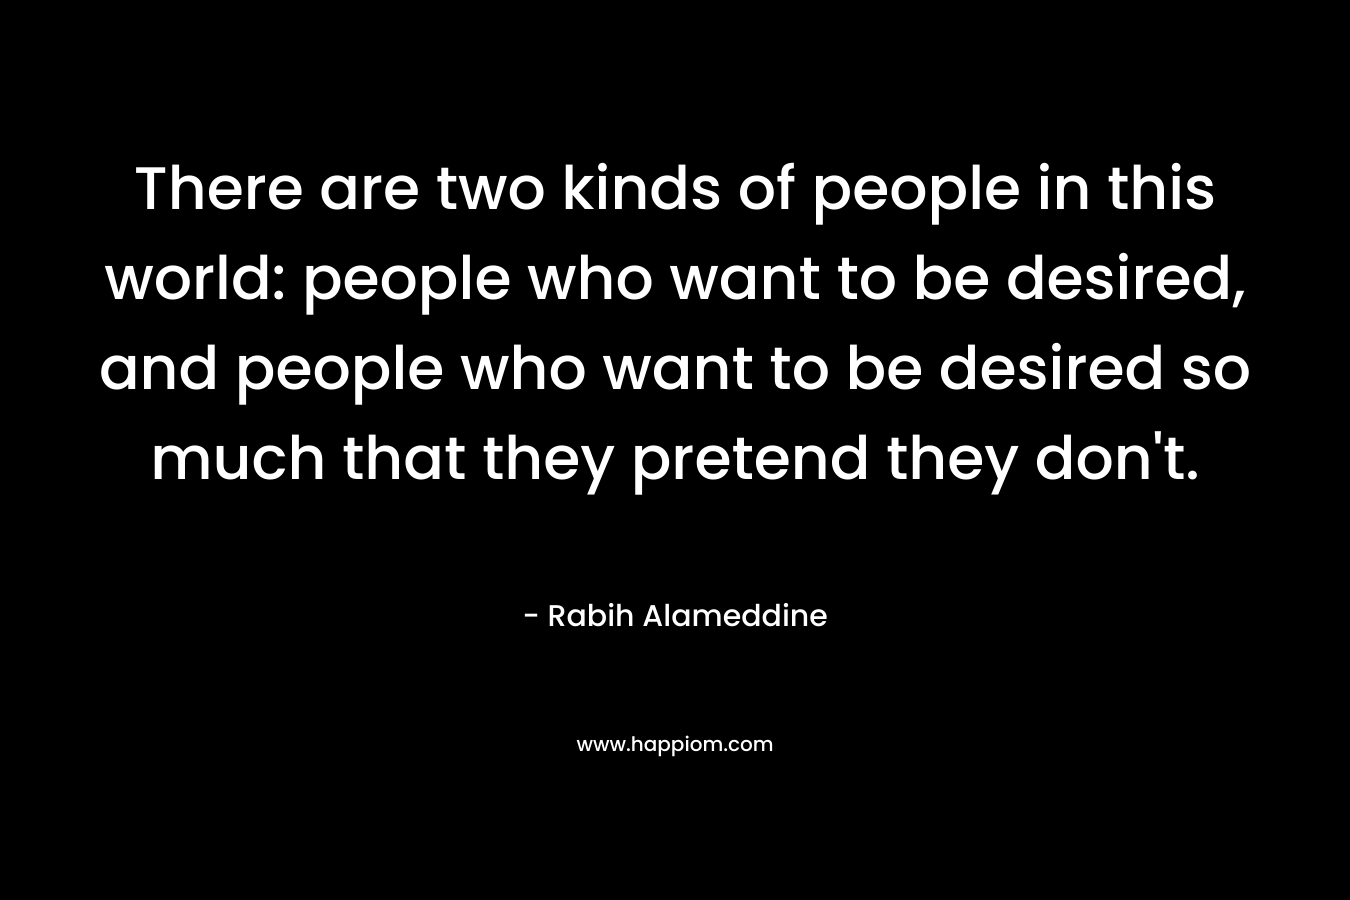 There are two kinds of people in this world: people who want to be desired, and people who want to be desired so much that they pretend they don't.